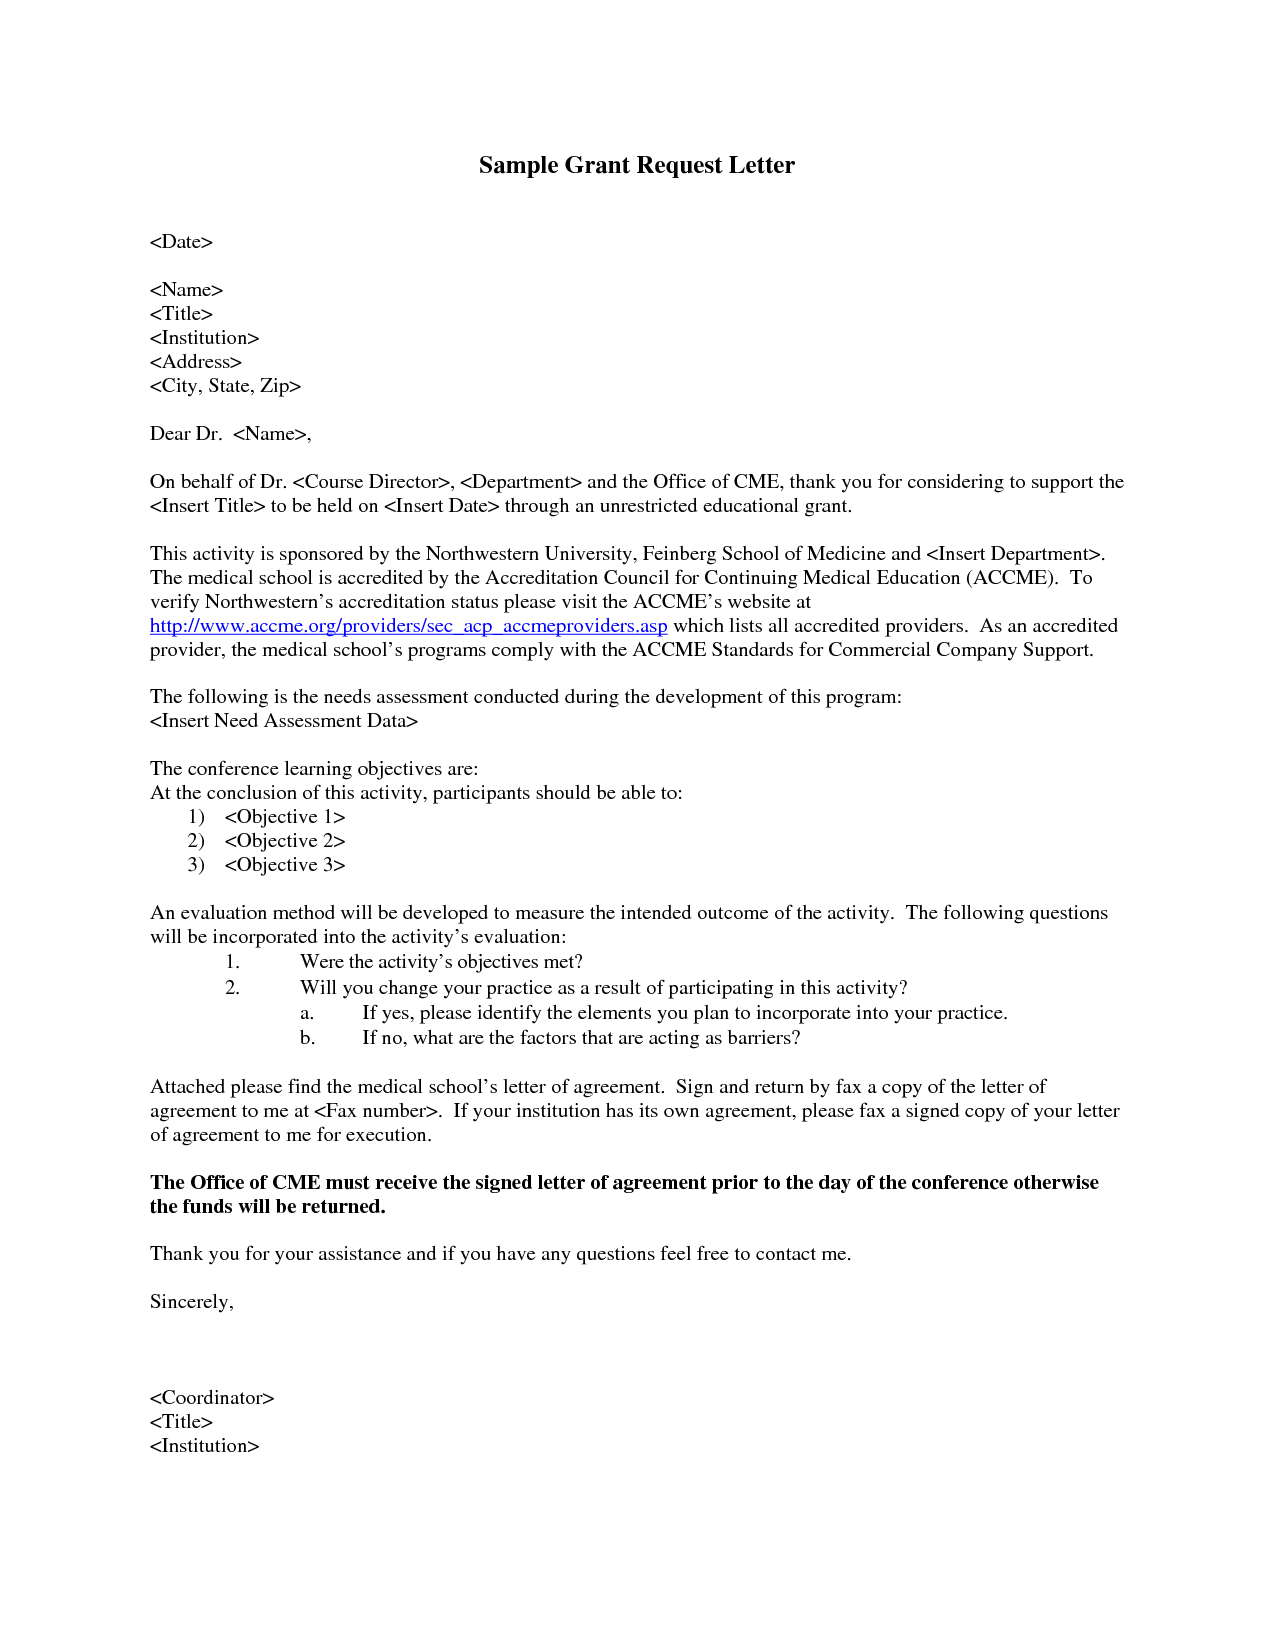 recommendation-letter-for-grant-funding-invitation-template-ideas